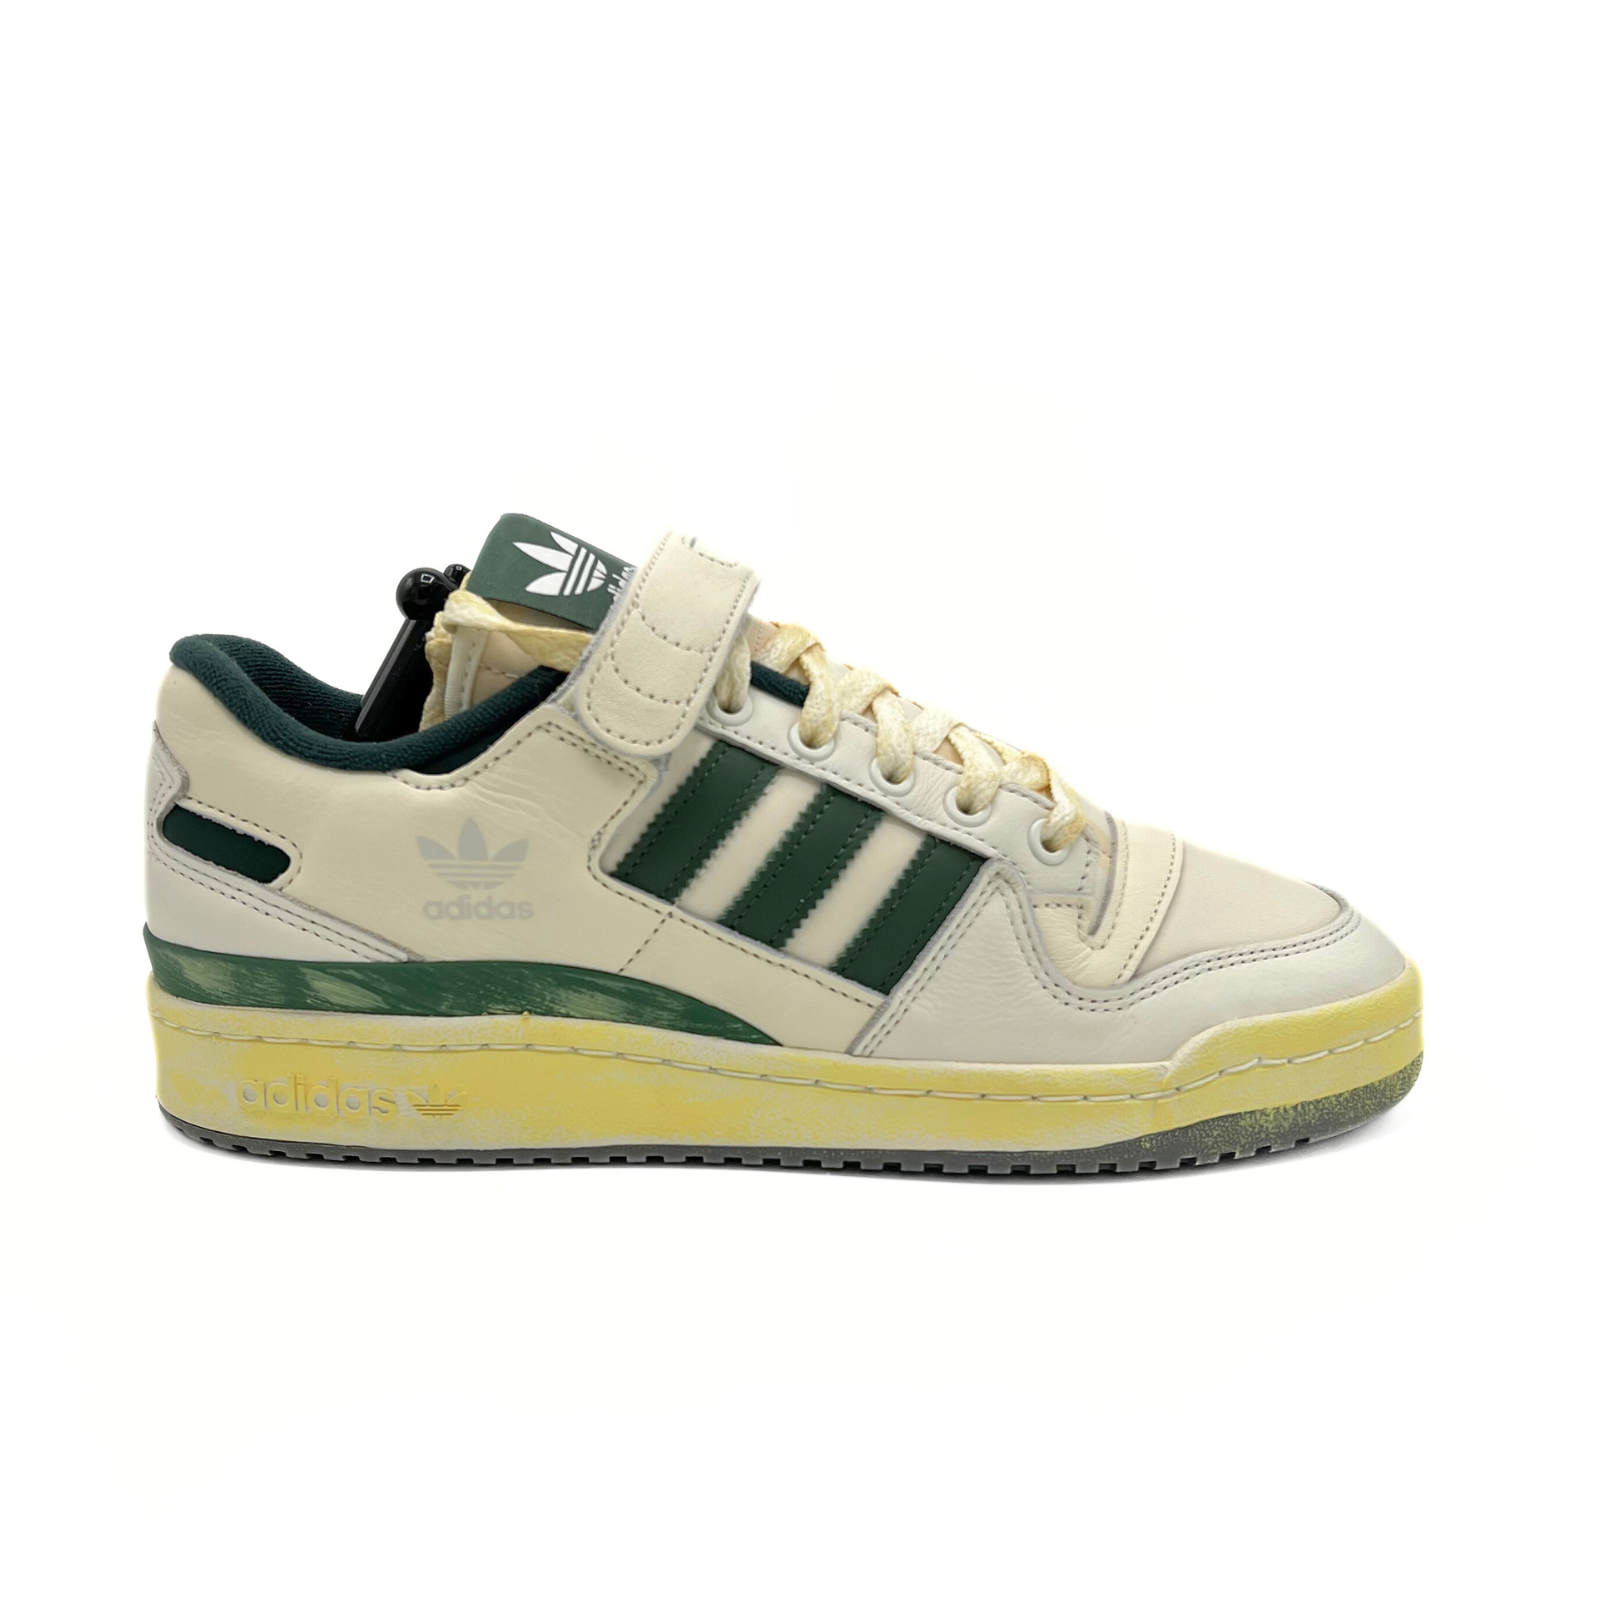 Adidas Forum 84 Low AEC 'Vintage Pack' (Green Oxide)